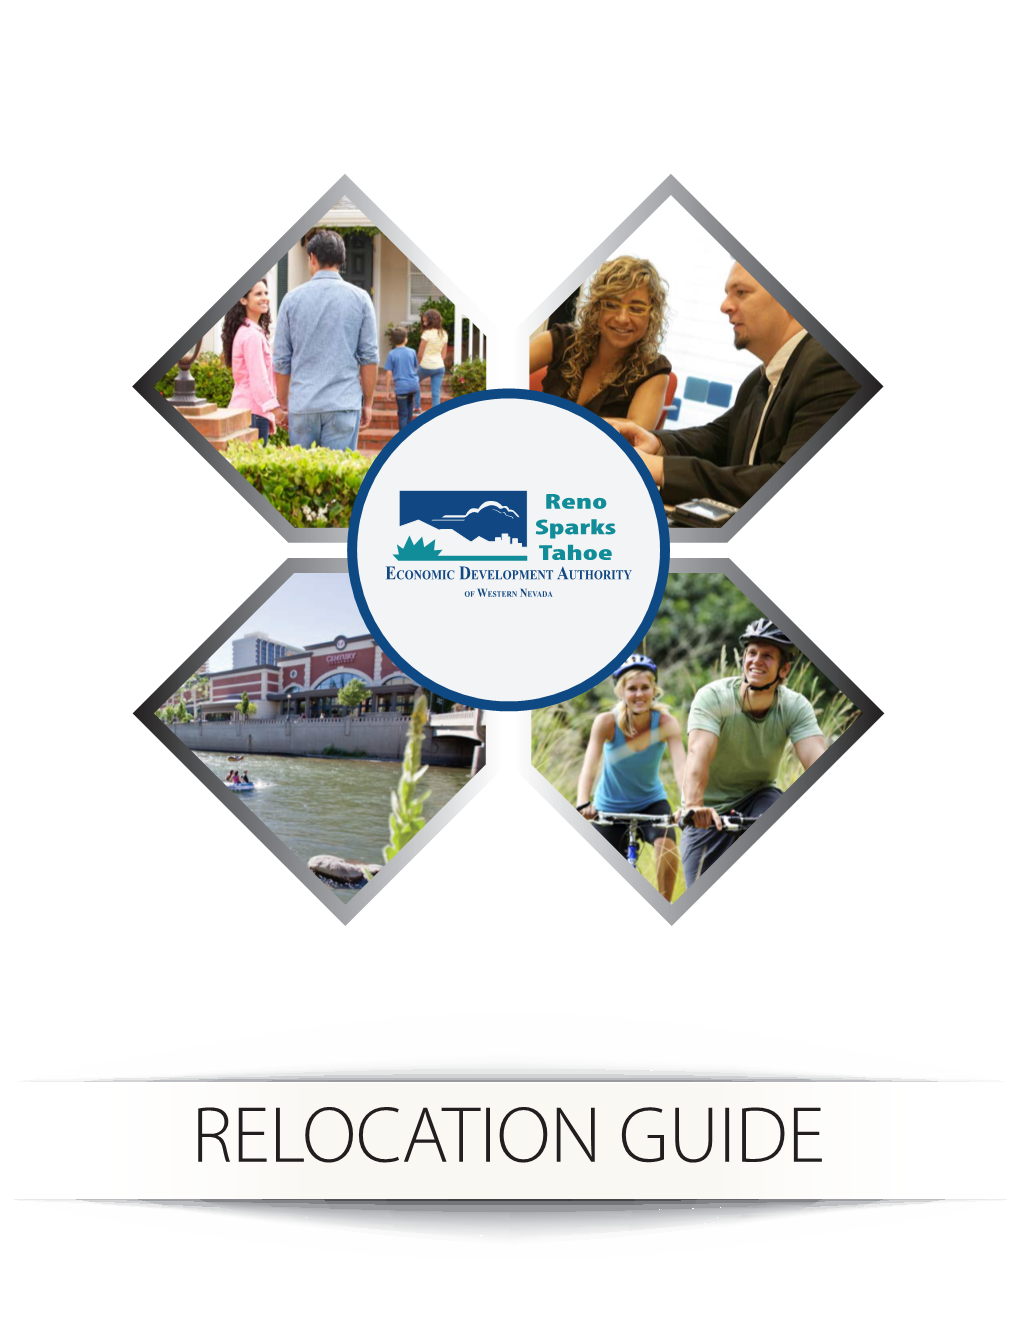 RELOCATION GUIDE 7 - 8 Flights Per Day to #10 Best Places to Live the Bay Area by Livability.Com